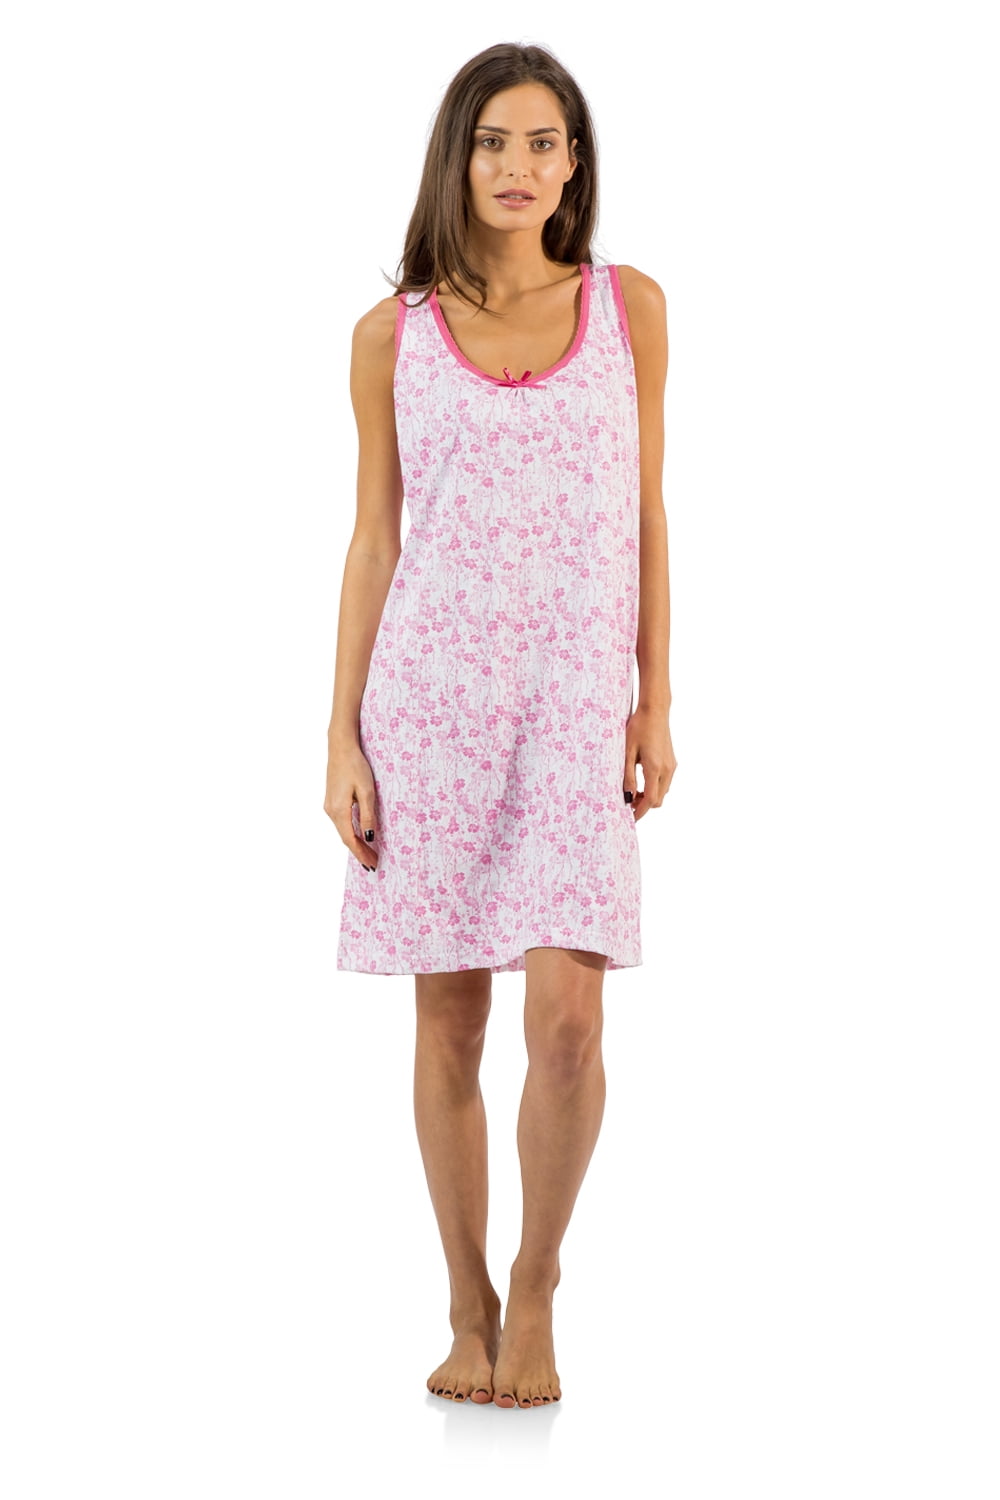 Aria Sleeveless Short 100% Cotton Nightgown with Pockets in 36